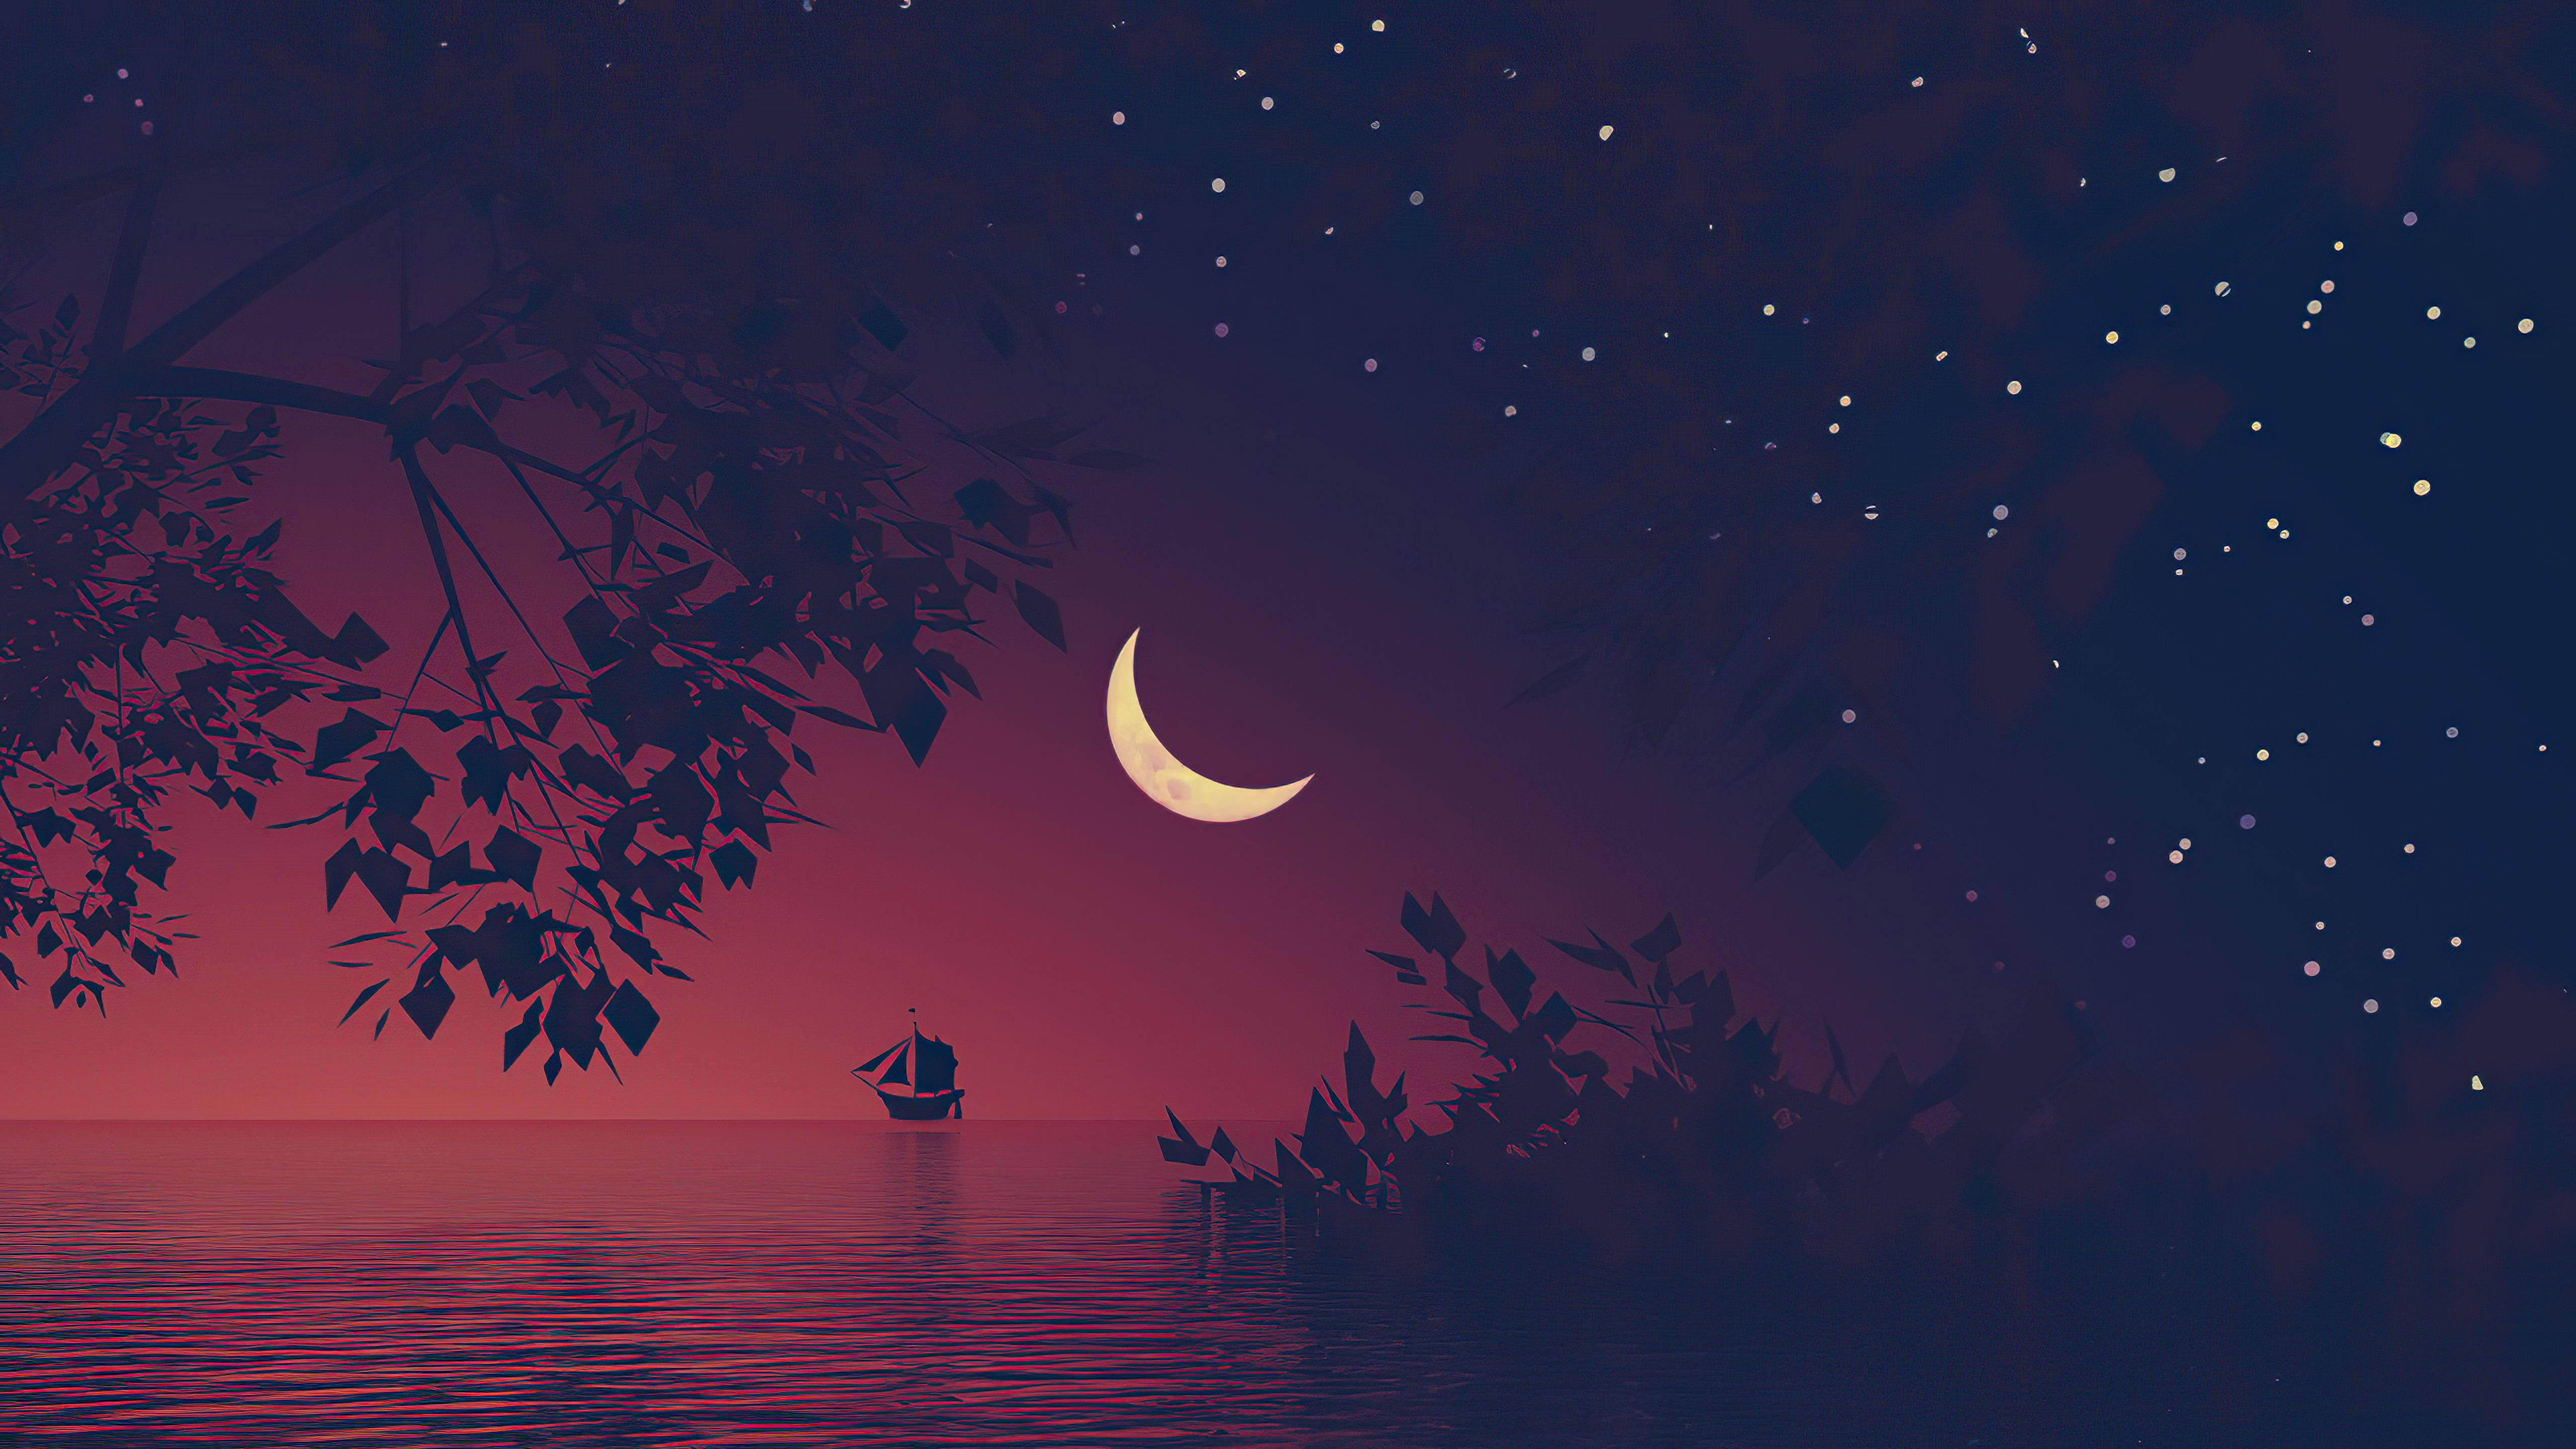 Boat Moon Minimal Landscape 5k, HD Artist, 4k Wallpaper, Image, Background, Photo and Picture